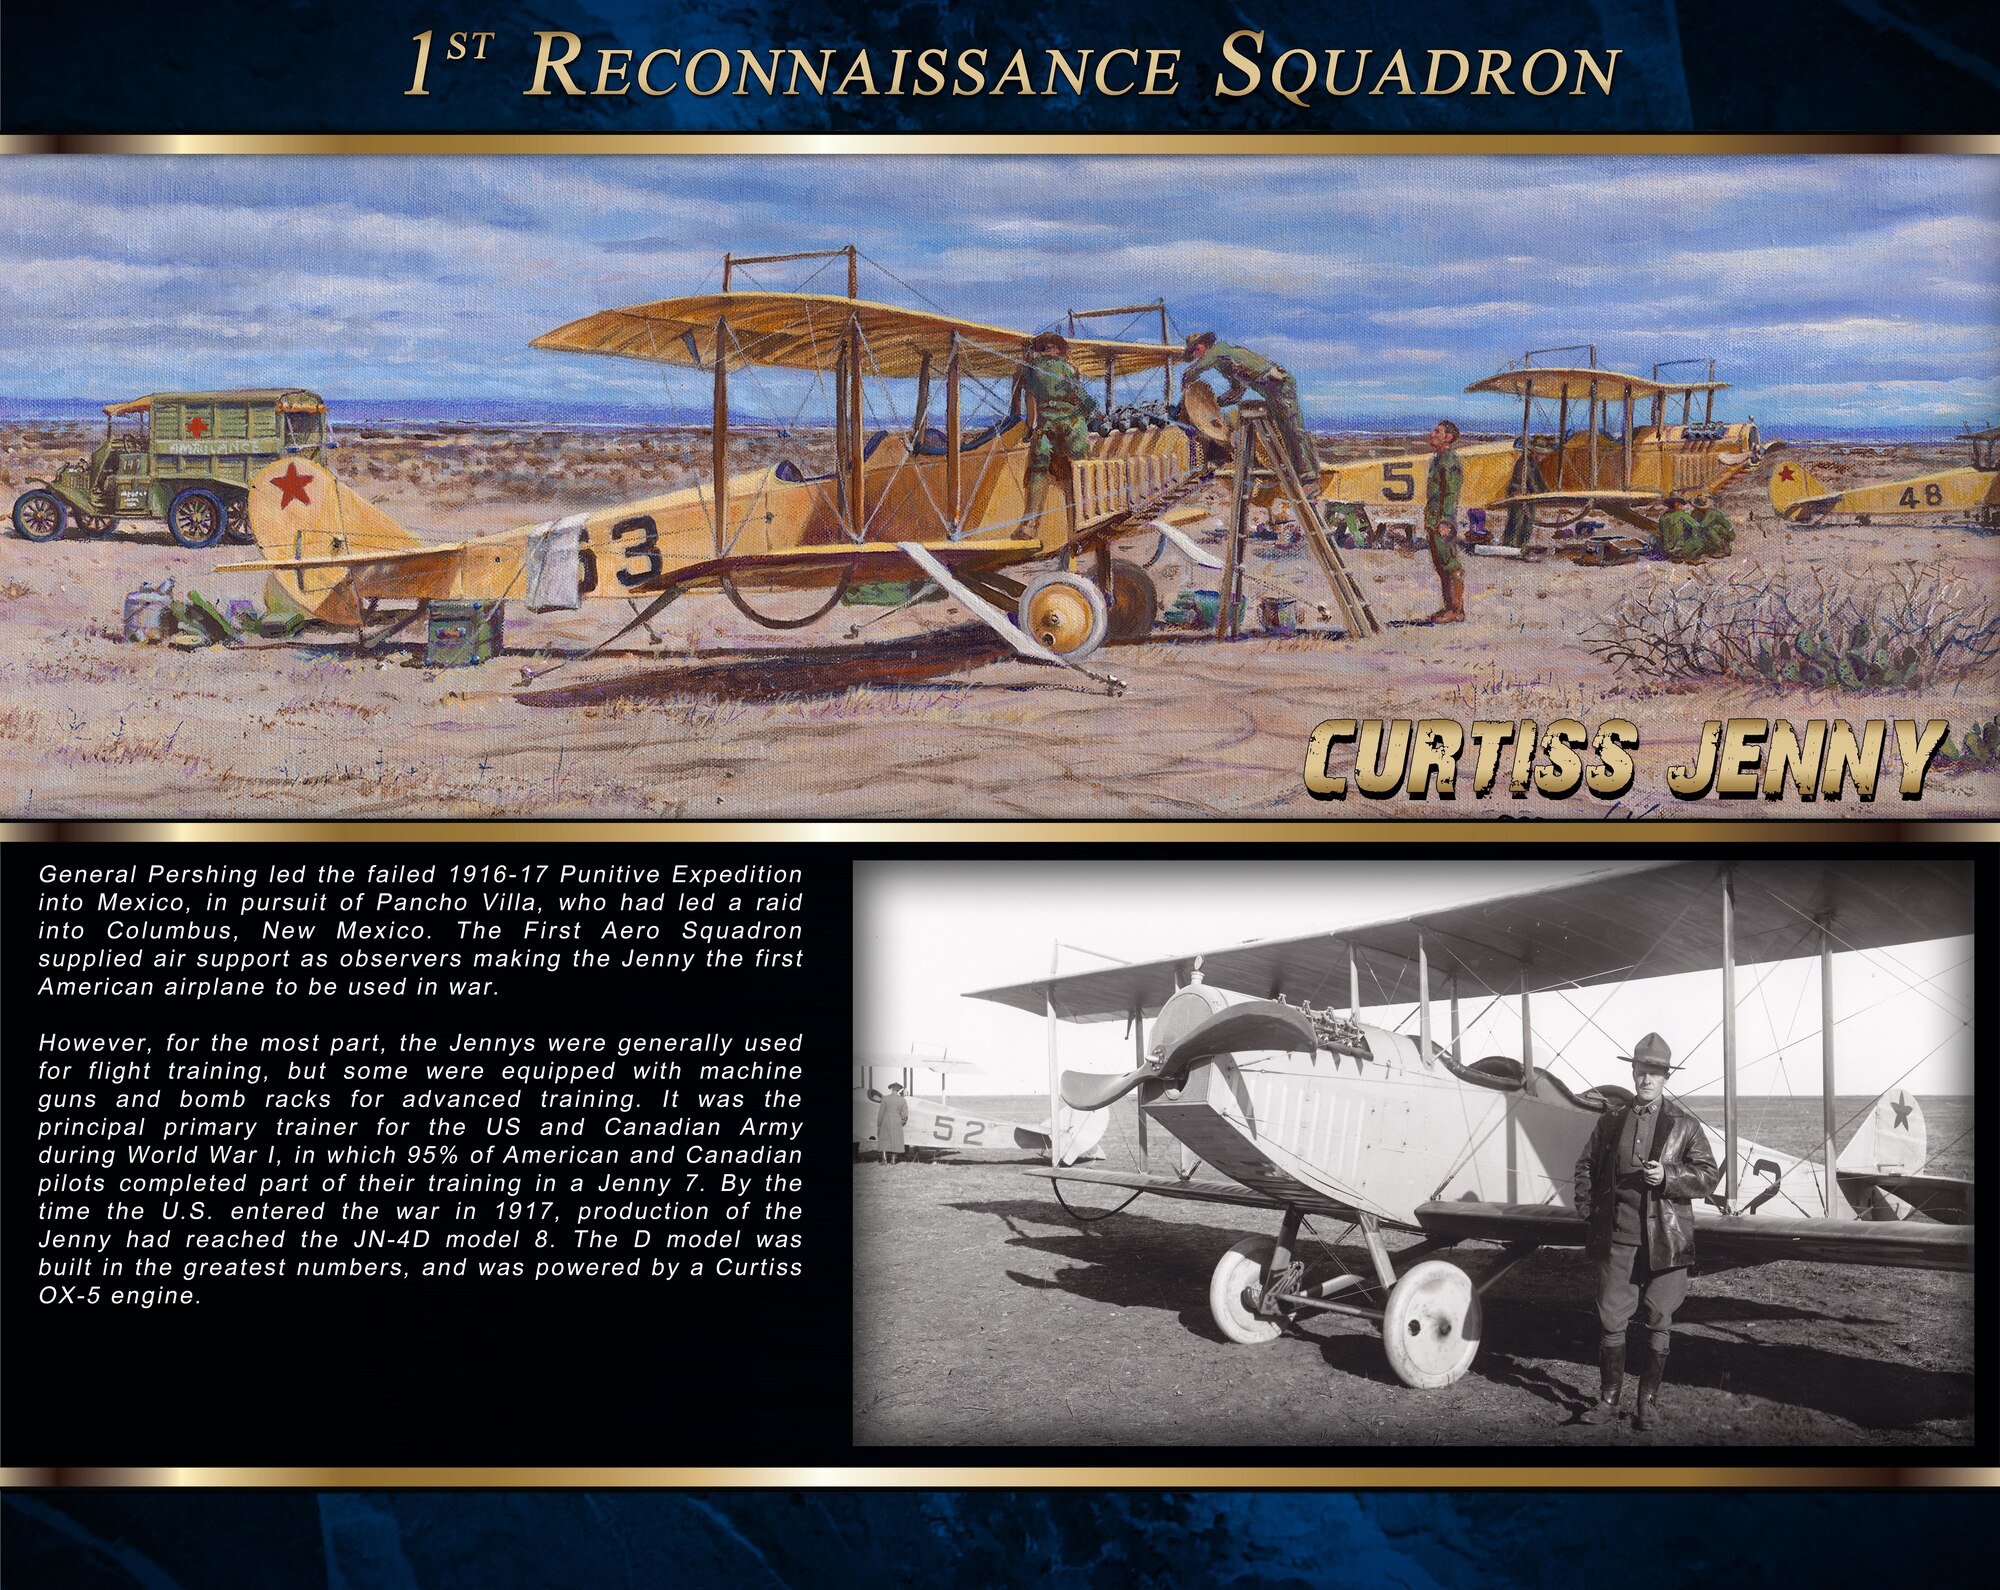 The Curtiss Jenny was the first American airplane to be used in war.